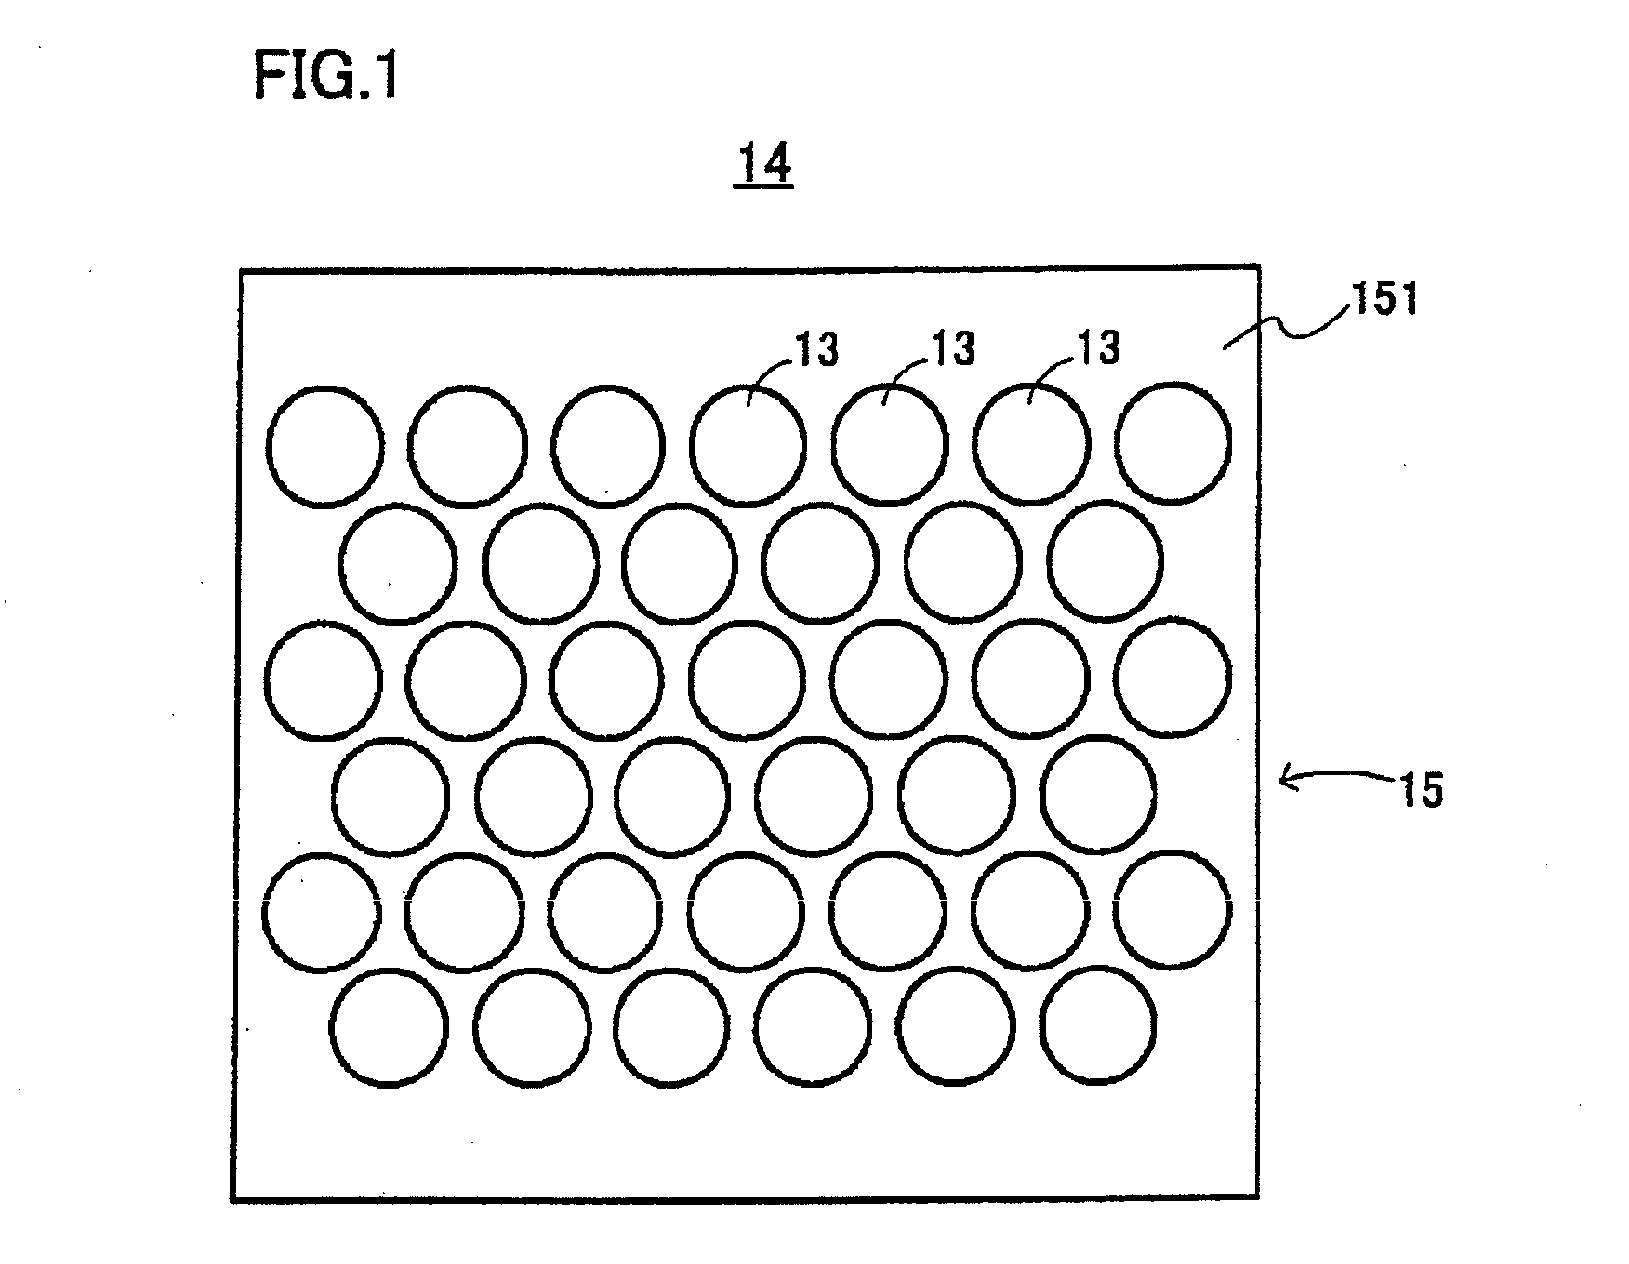 Micro lens array sheet for use in backlight device and molding roll for manufacturing such mirco lens array sheet